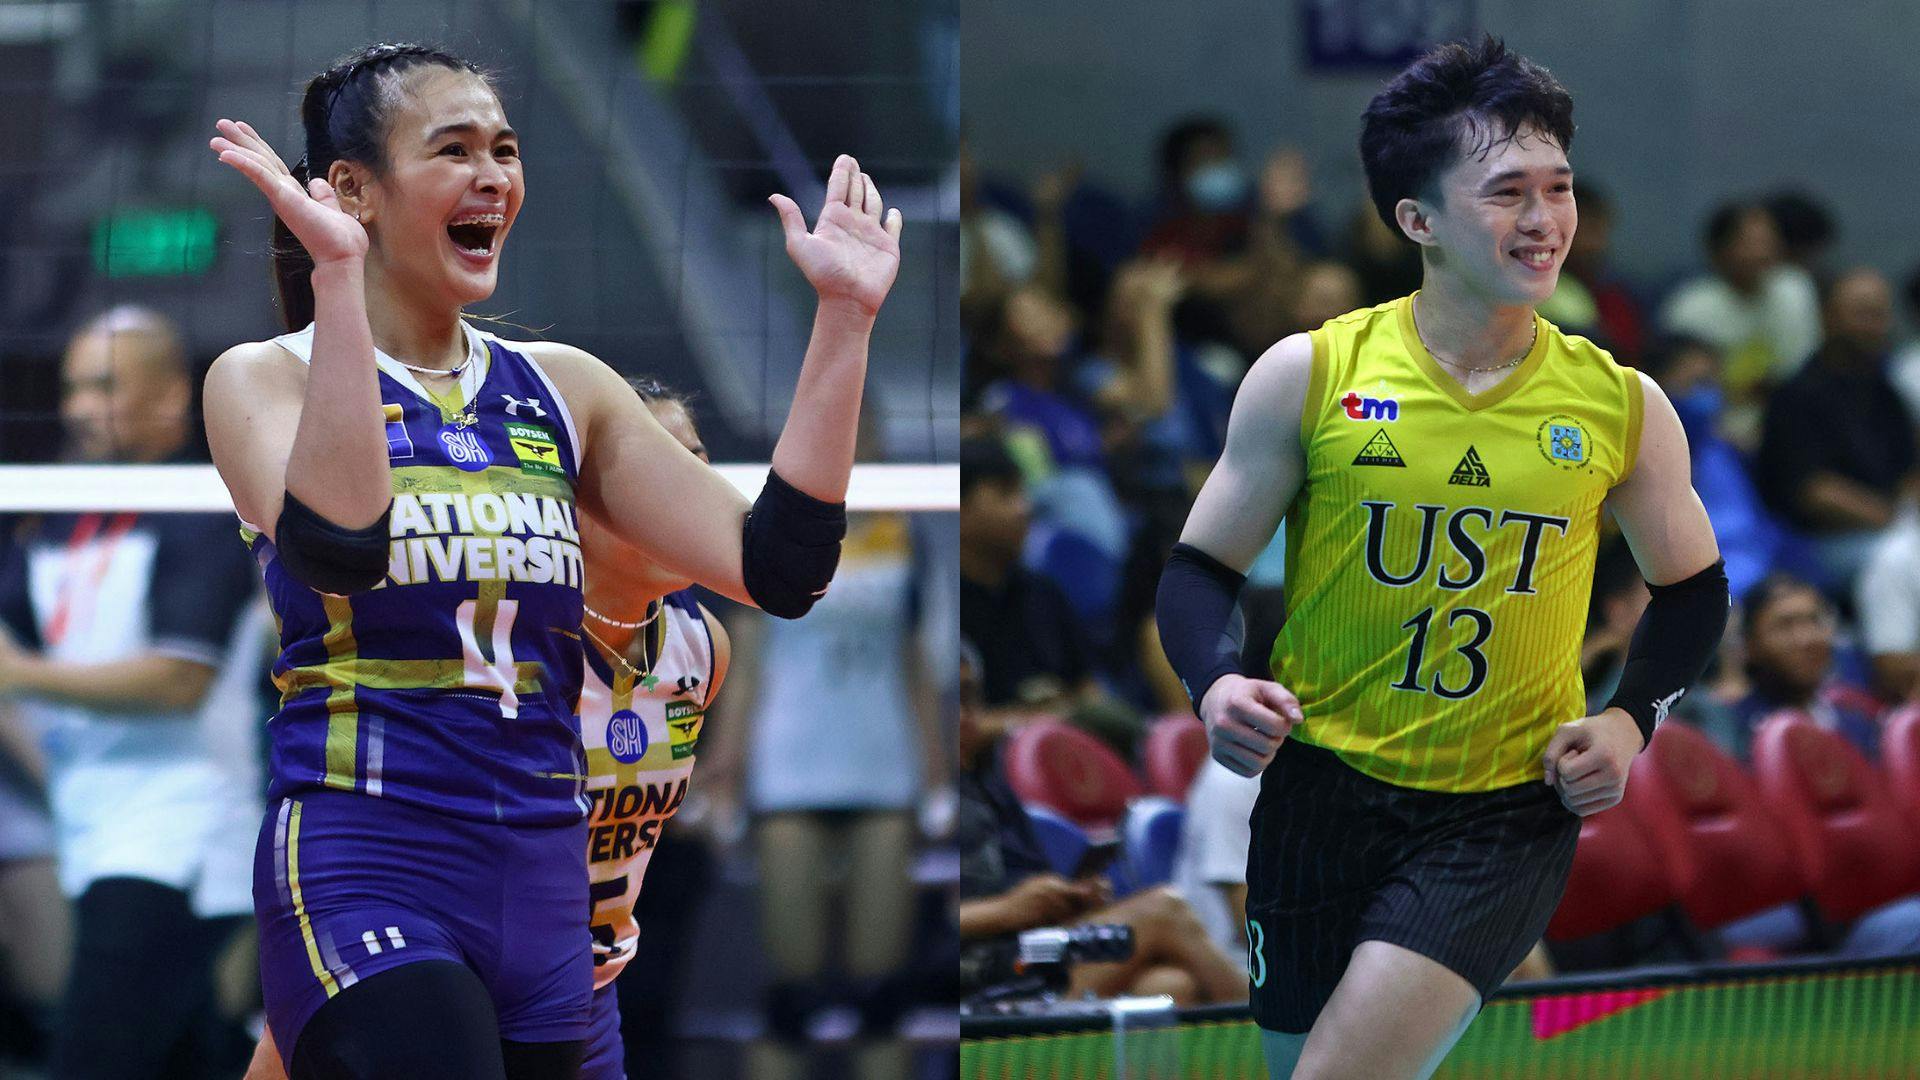 Leading by example: Bella Belen, Josh Ybanez named UAAP Players of the Week